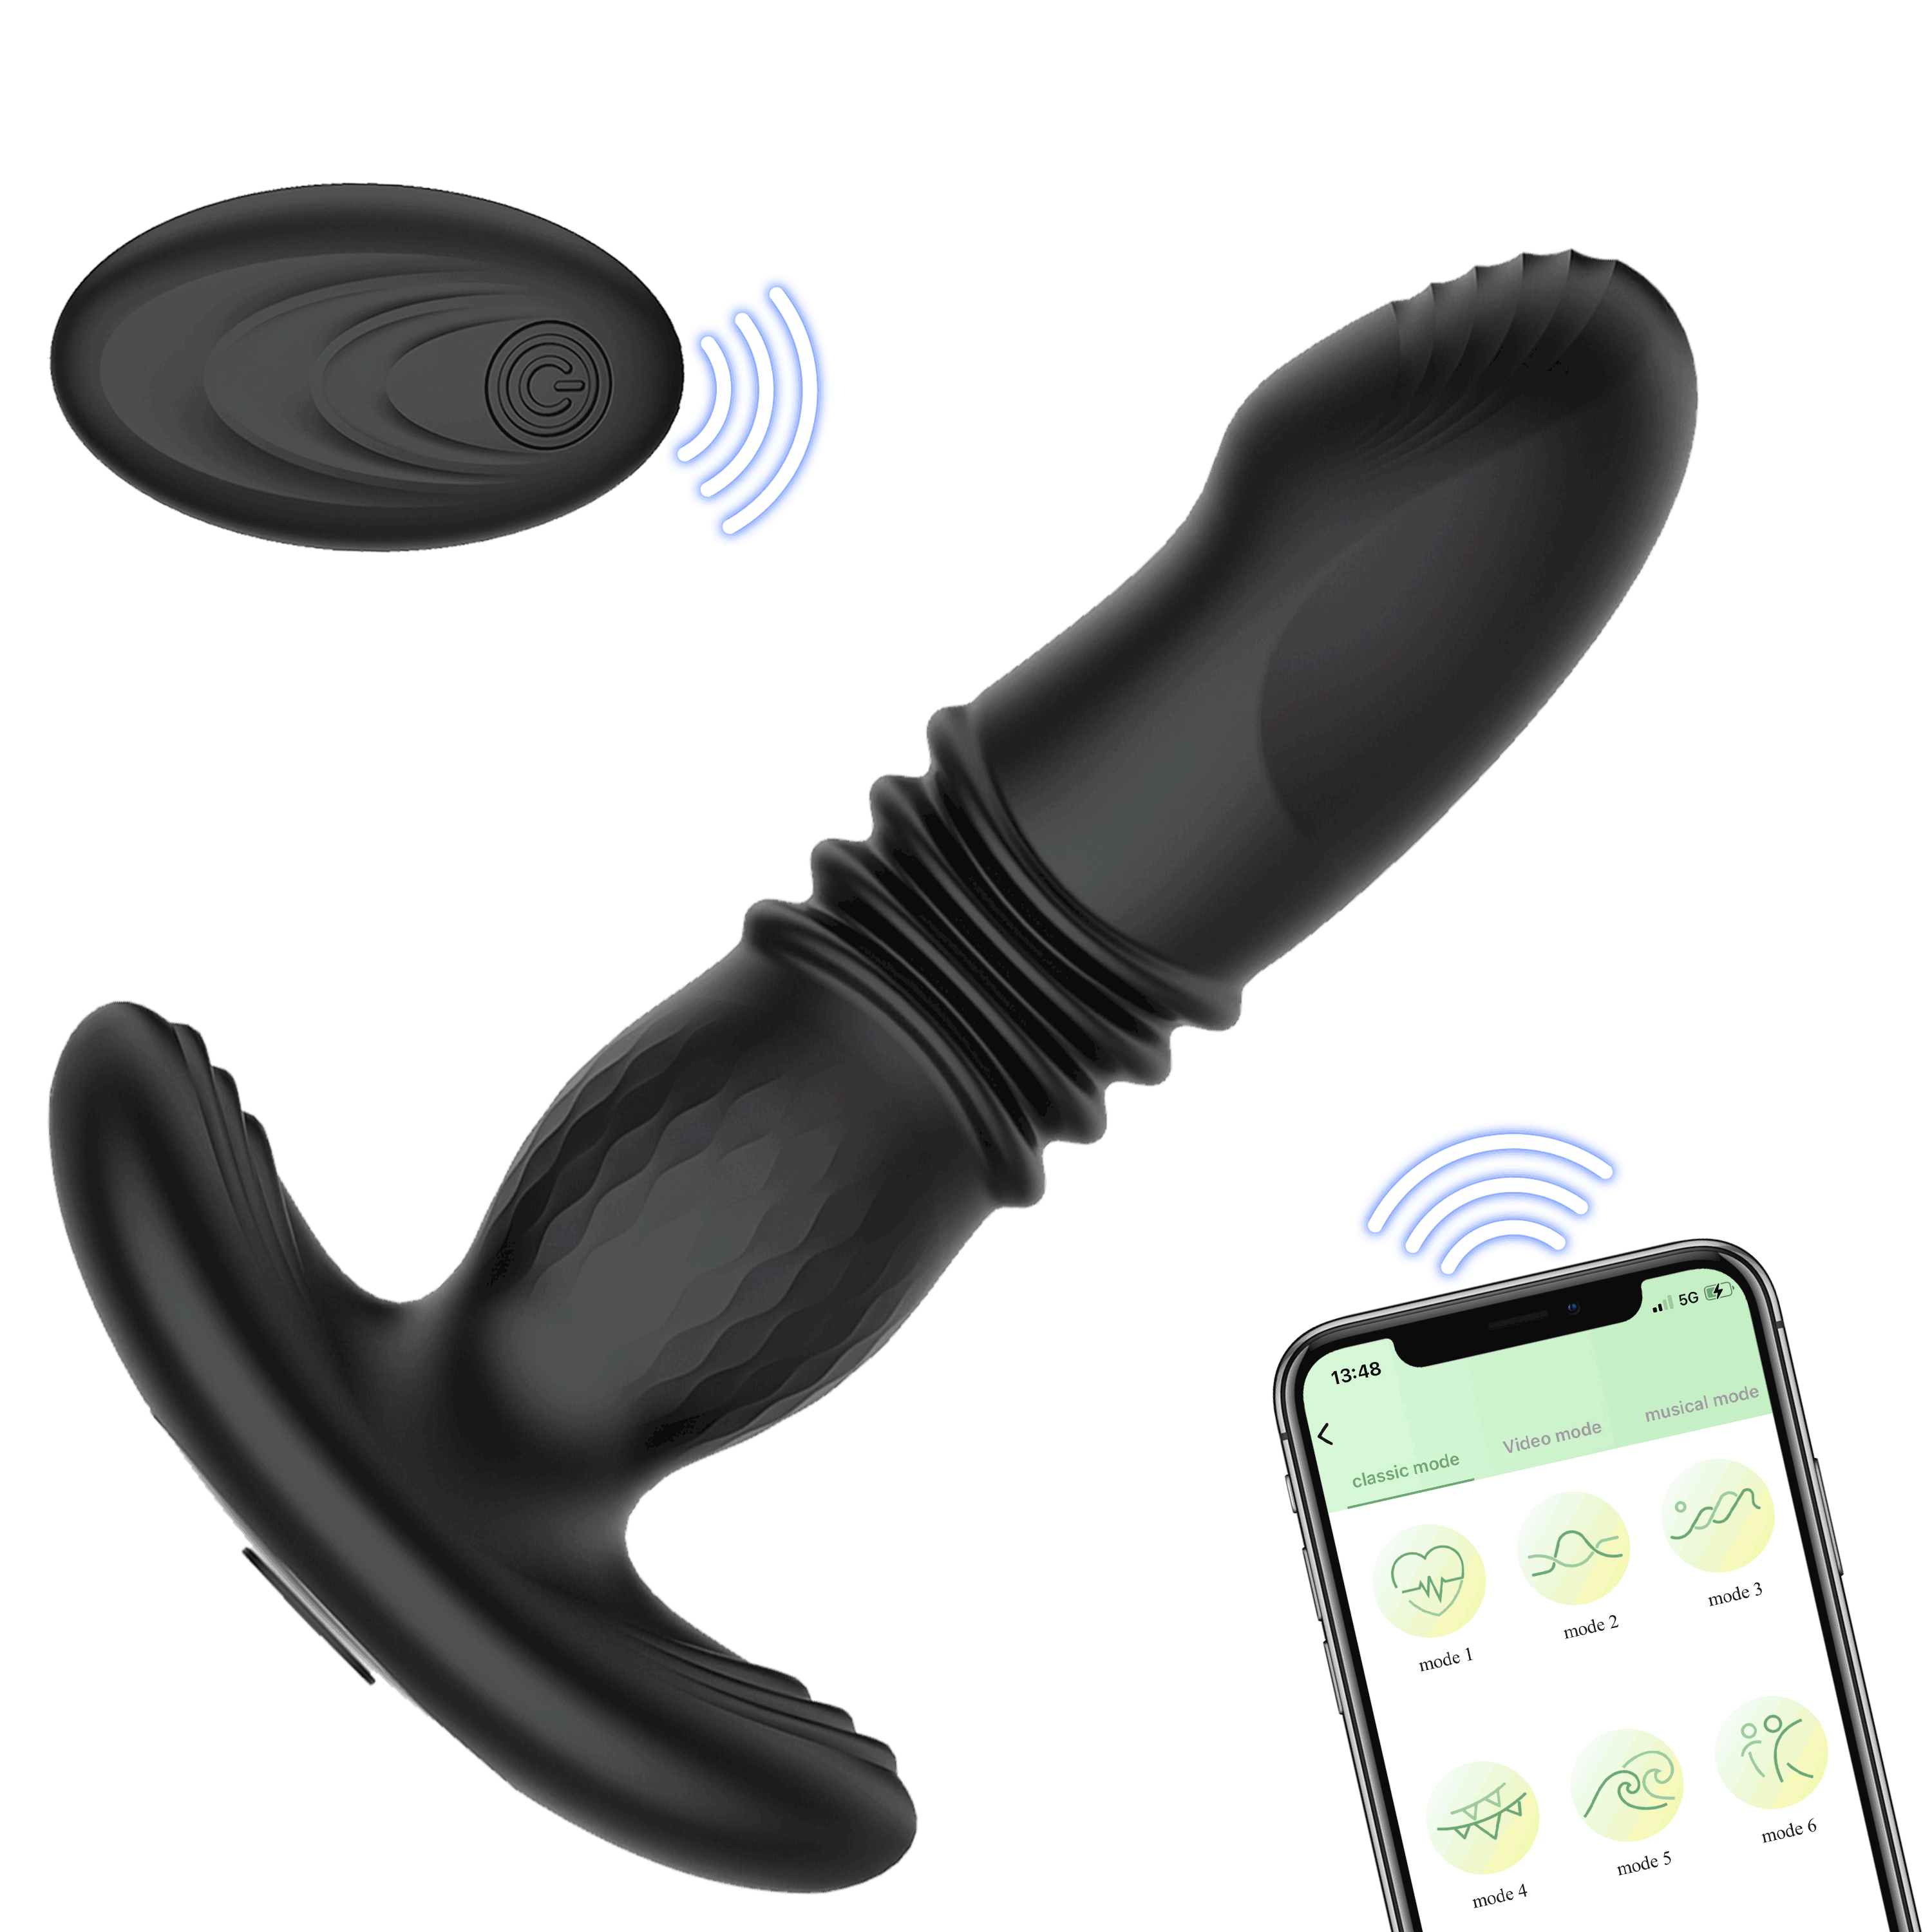 Laphwing Rider 5.79 Inch Thrusting Anal Vibrator App Available